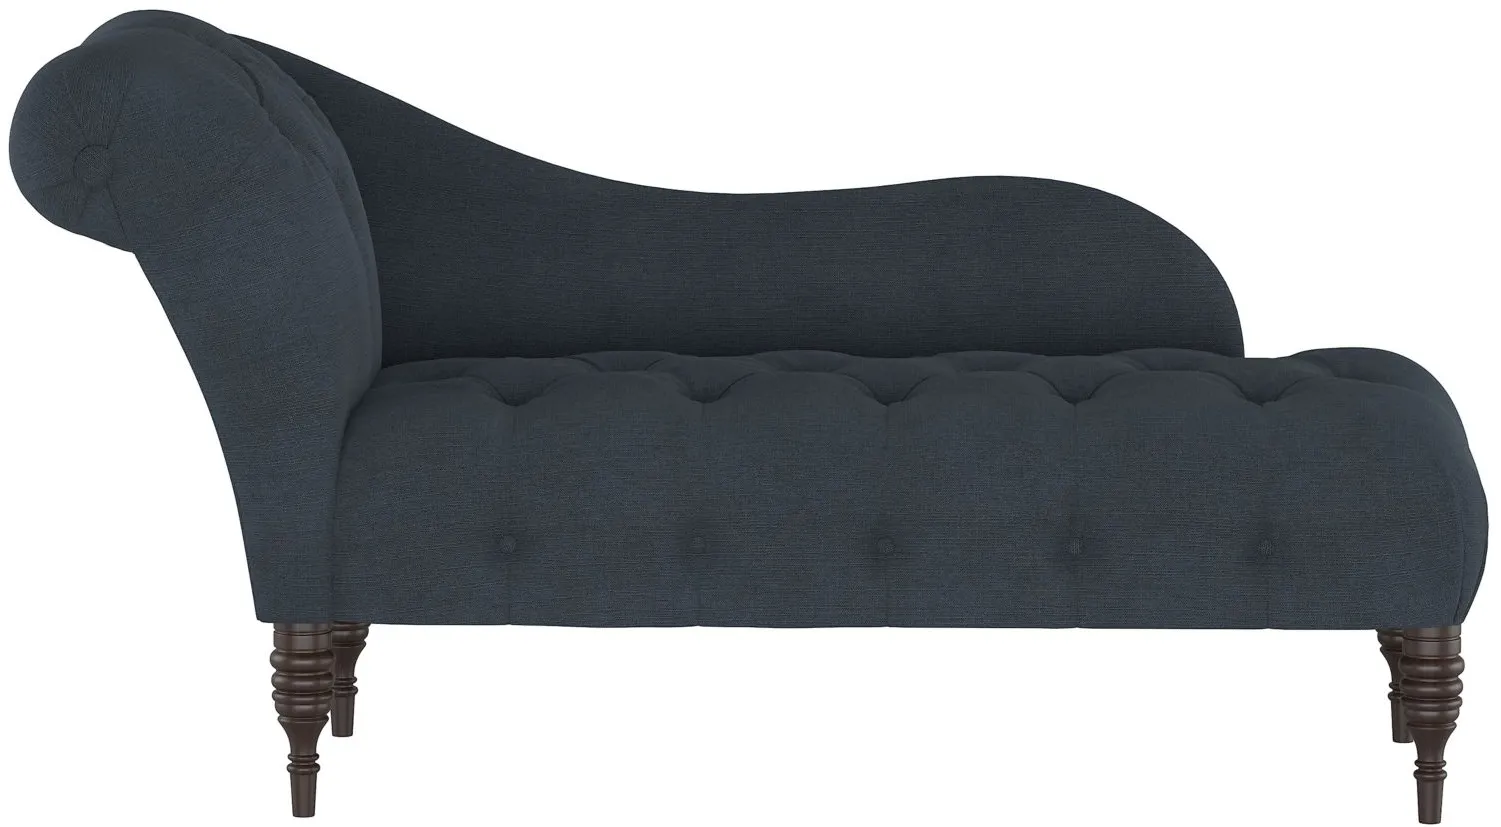 Opulence Chaise Lounge in Linen Navy by Skyline